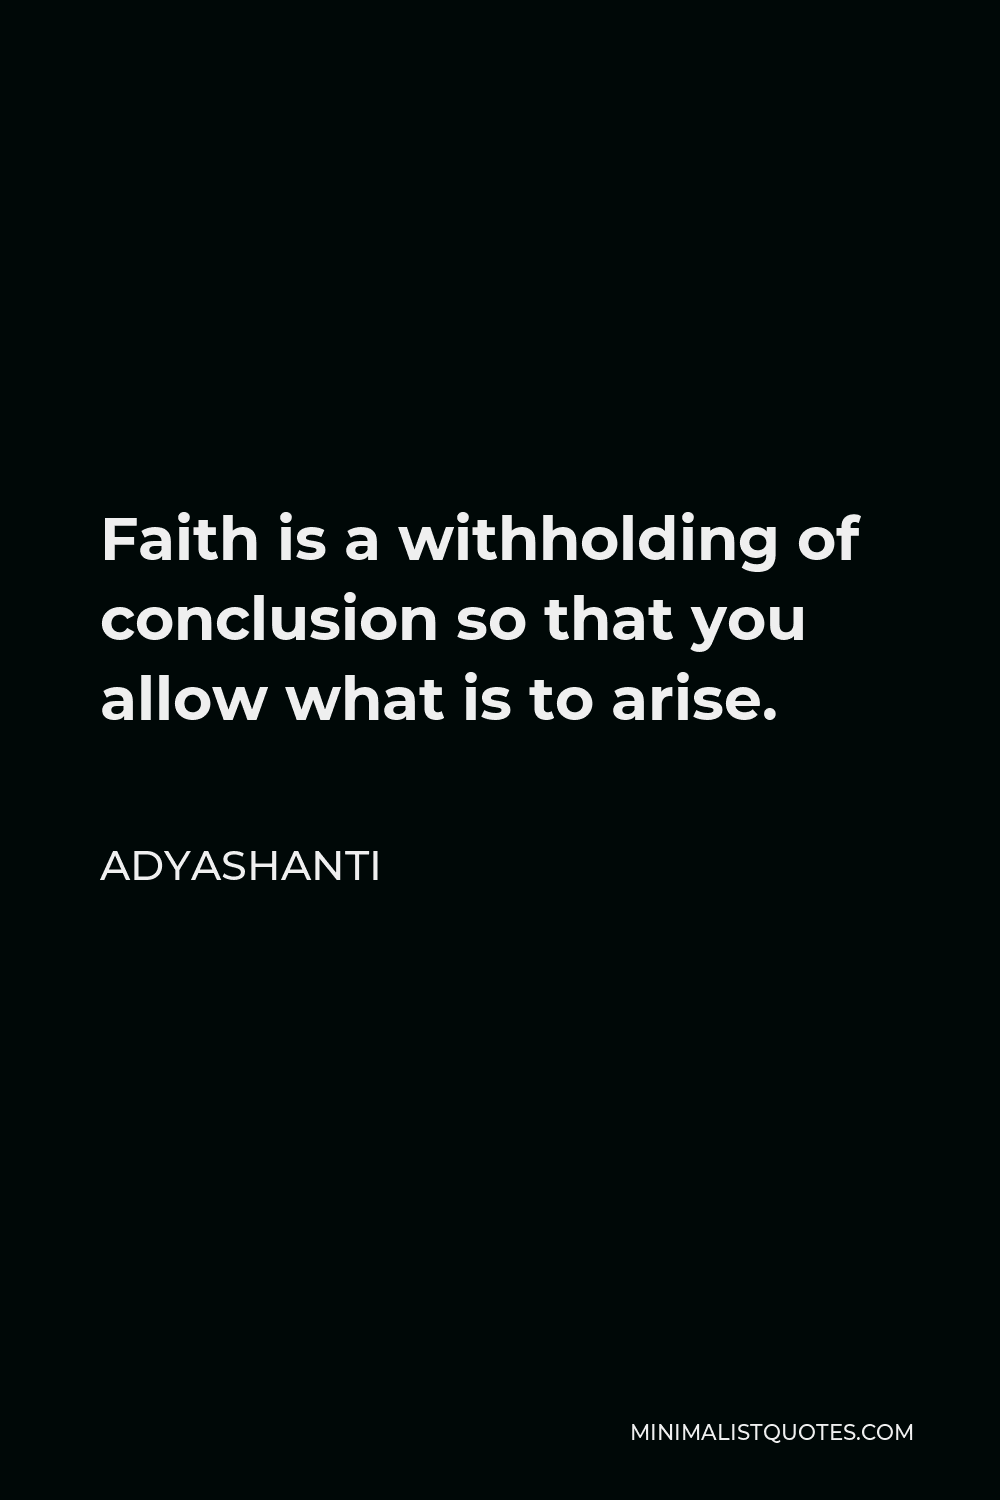 Adyashanti Quote - Faith is a withholding of conclusion so that you allow what is to arise.